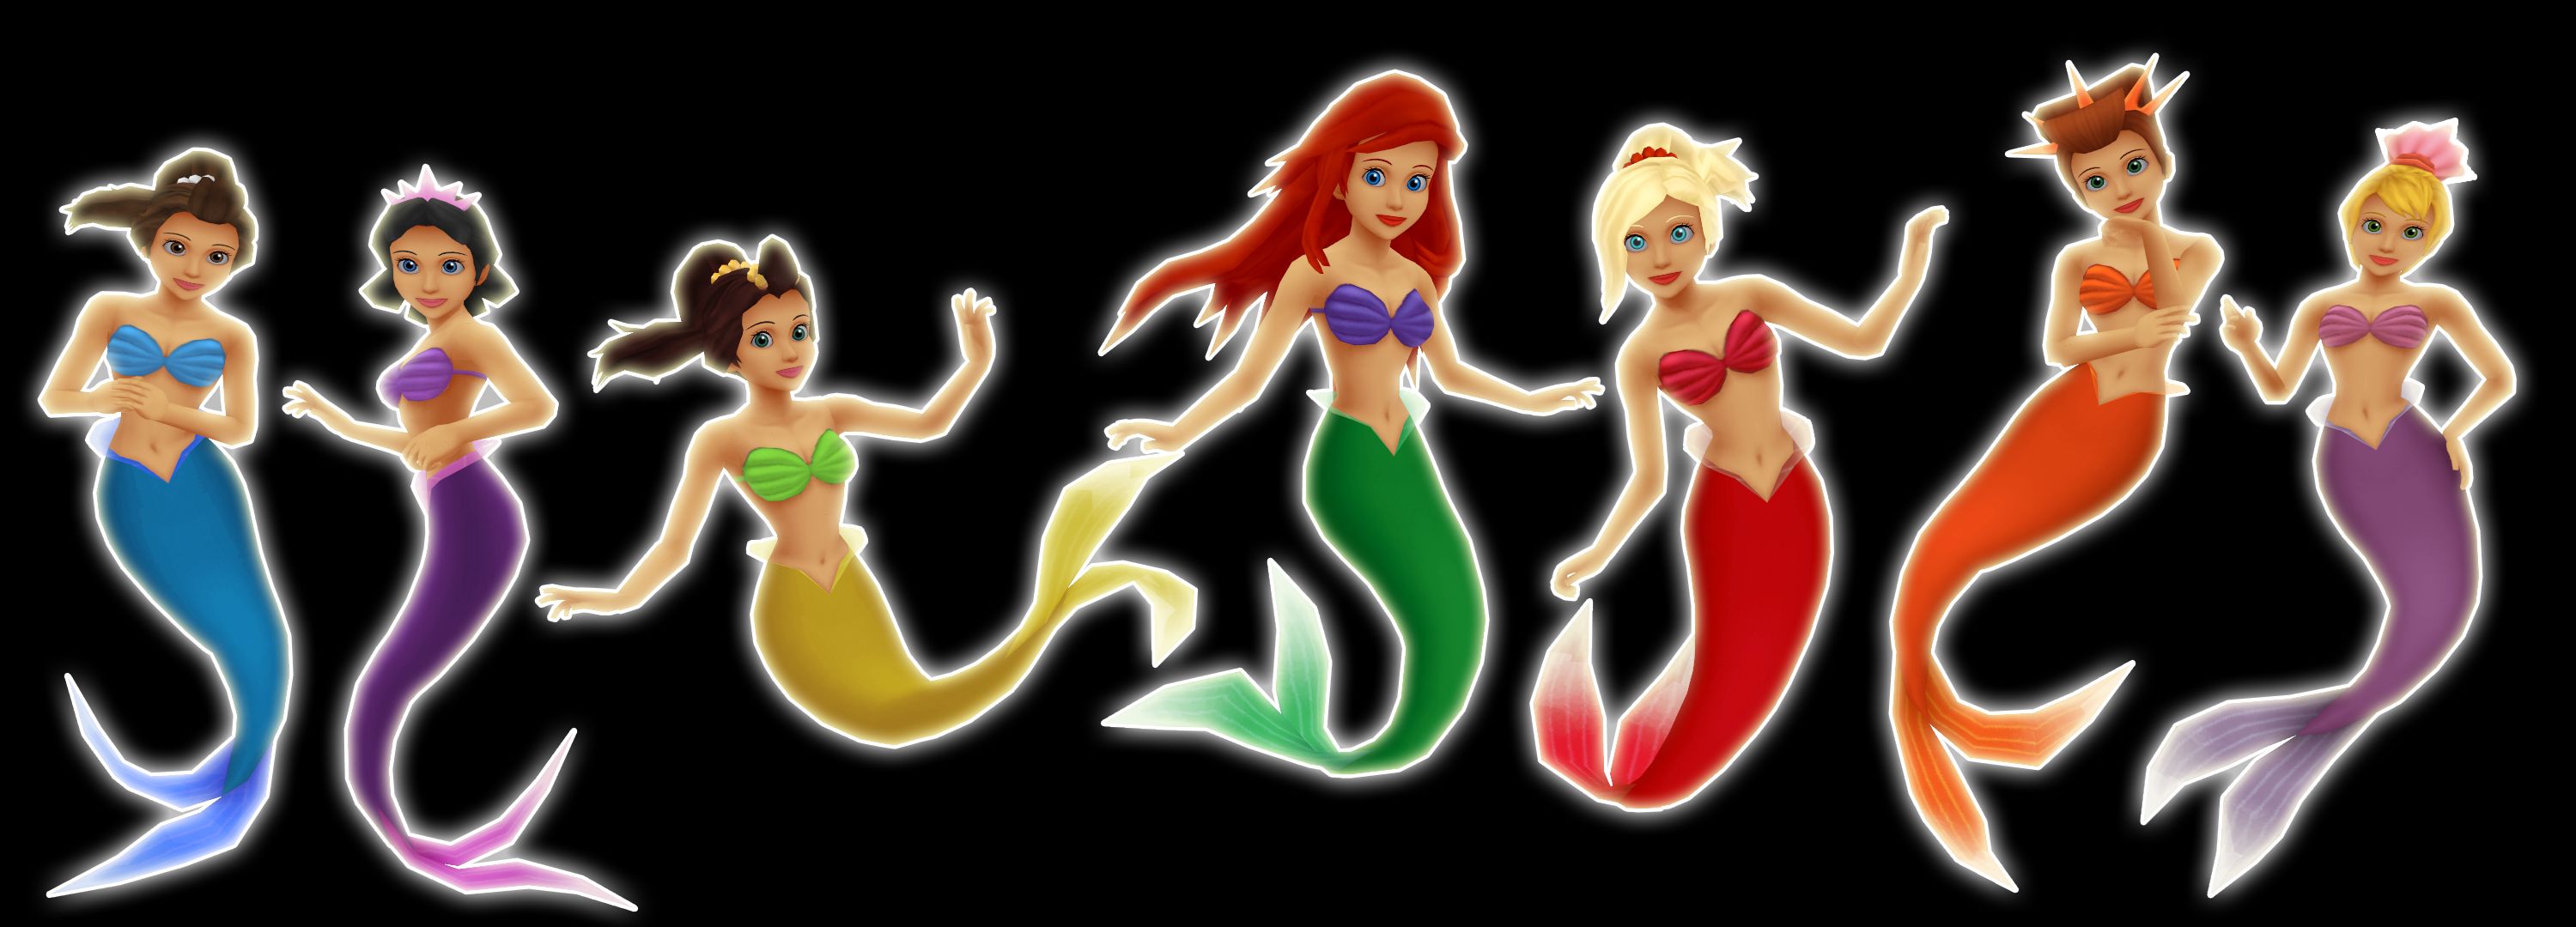 andrina (the little mermaid), video game, kingdom hearts, adella (the little mermaid), alana (the little mermaid), aquata (the little mermaid), ariel (the little mermaid), arista (the little mermaid), attina (the little mermaid), black hair, blonde, brown hair, mermaid, red hair